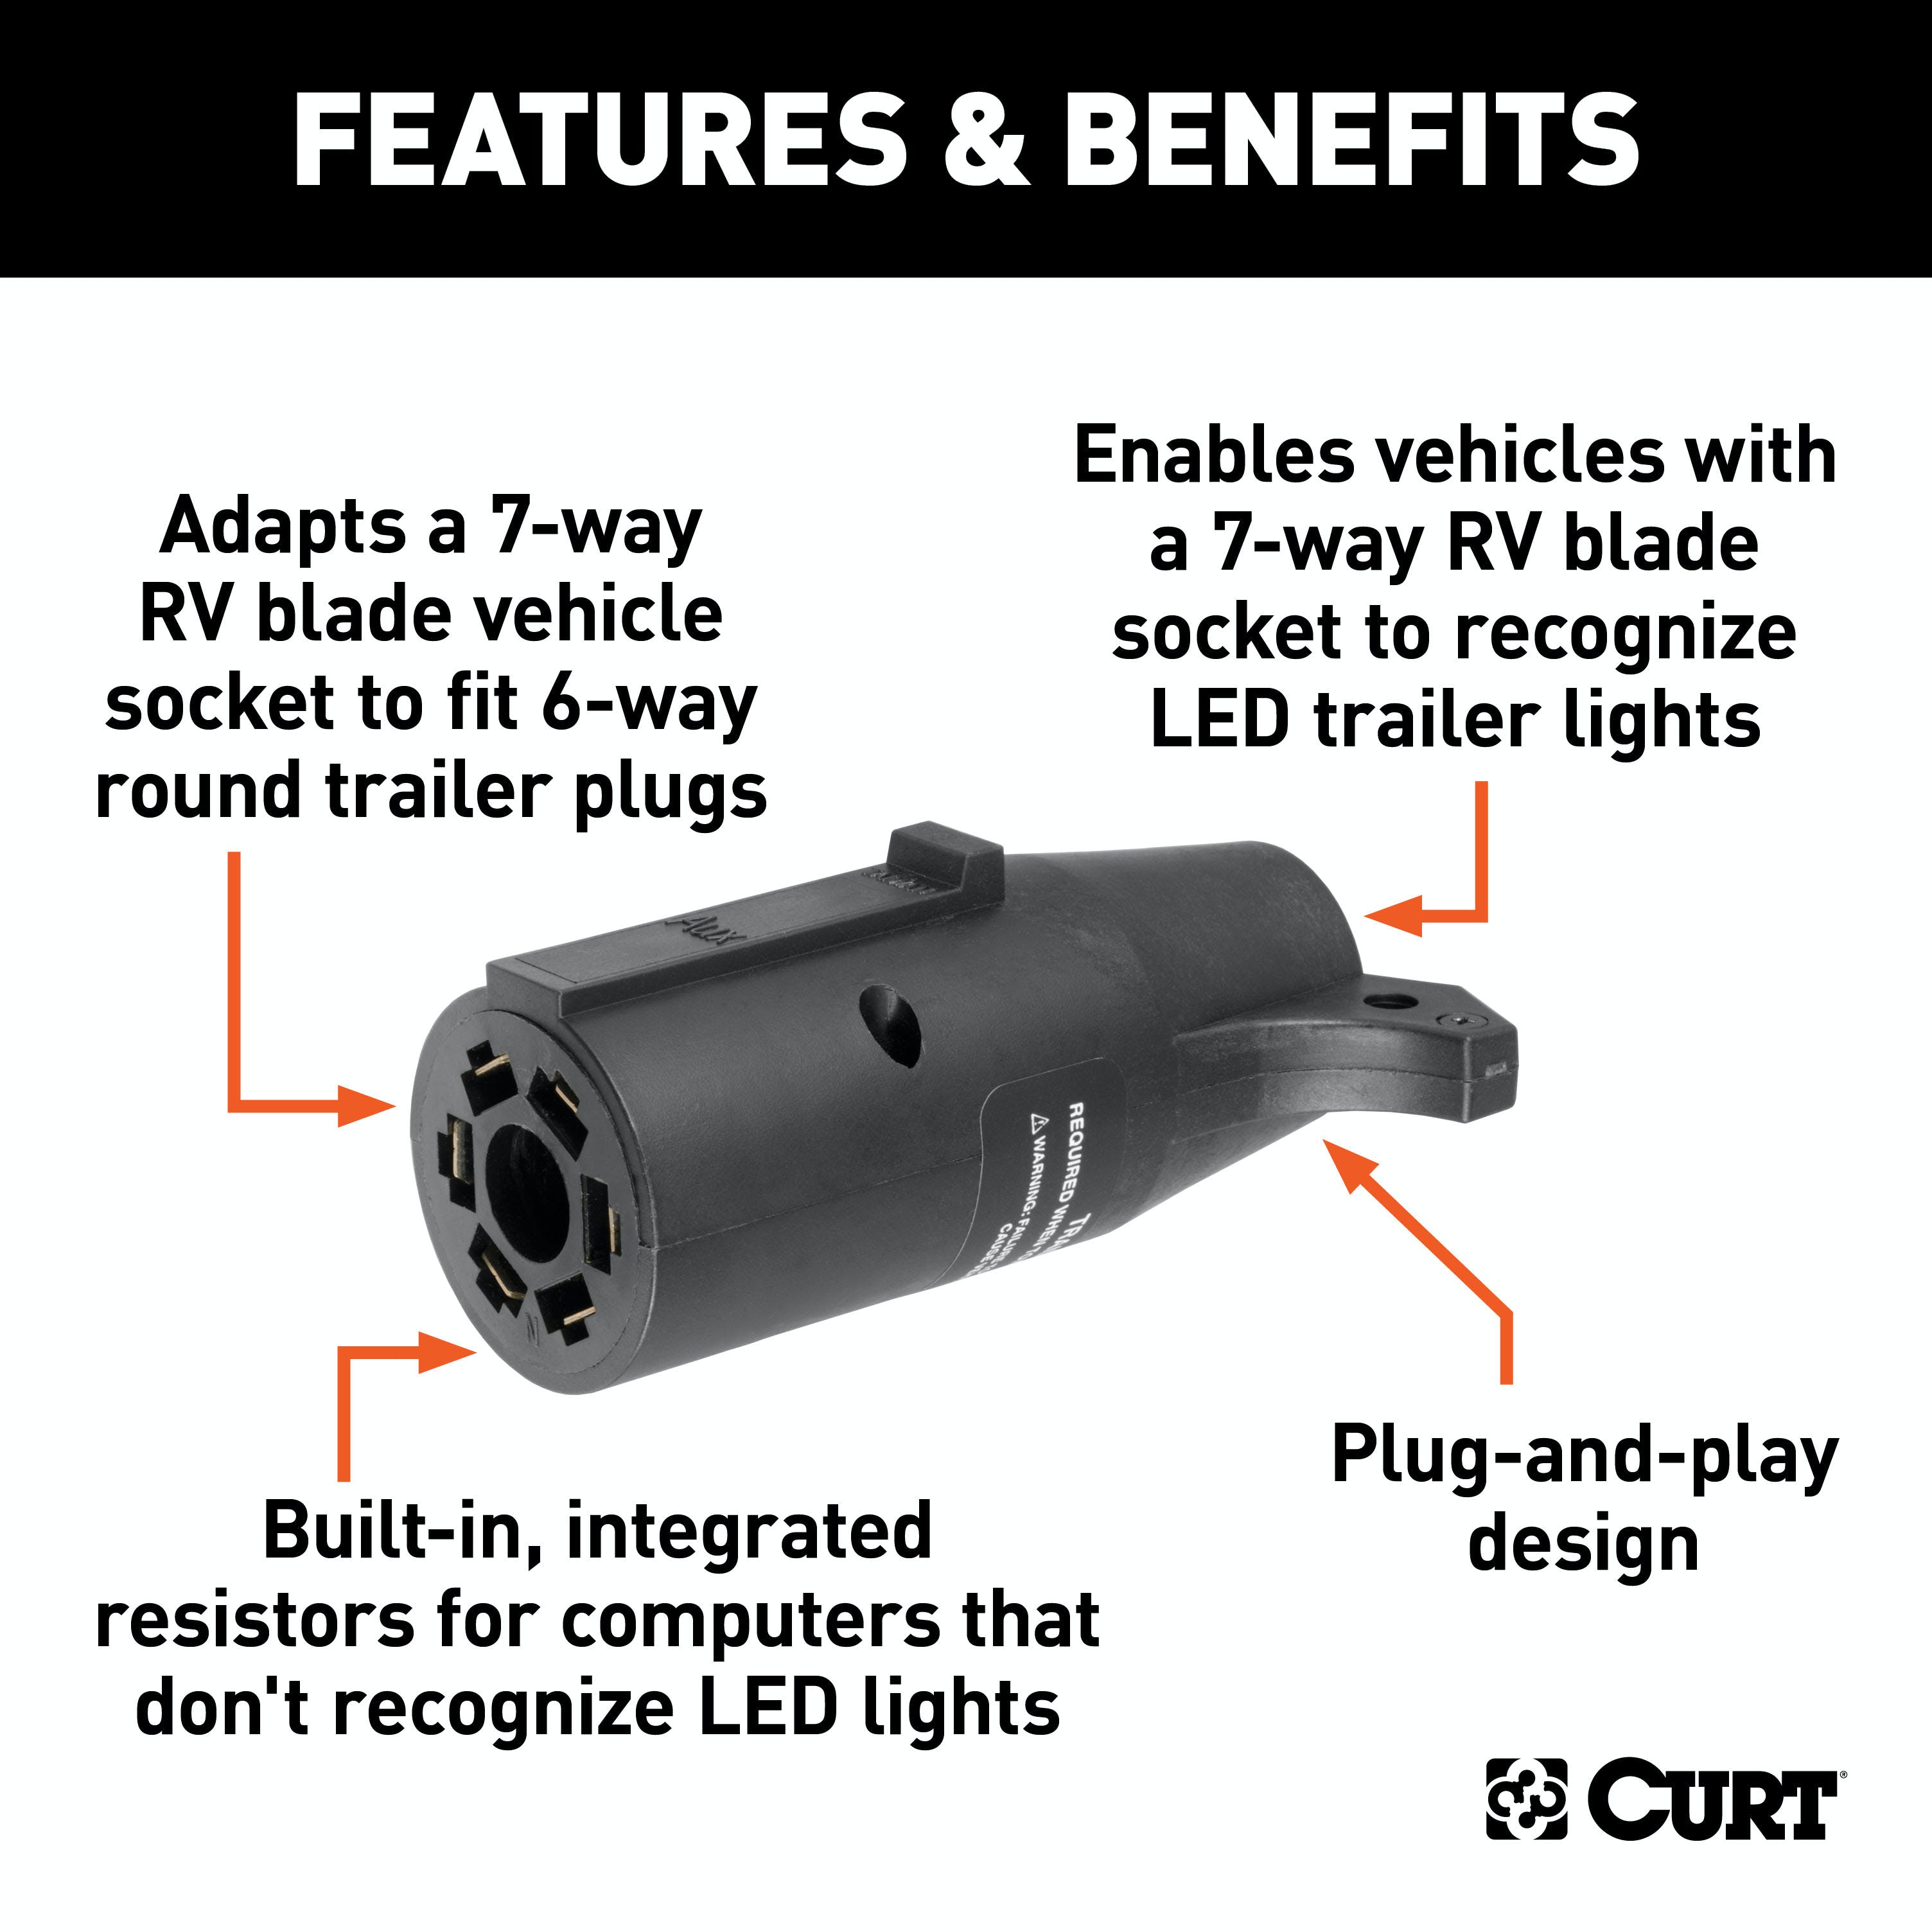 CURT 57005 LED Electrical Adapter (7-Way RV Blade Vehicle to 6-Way Round Trailer)